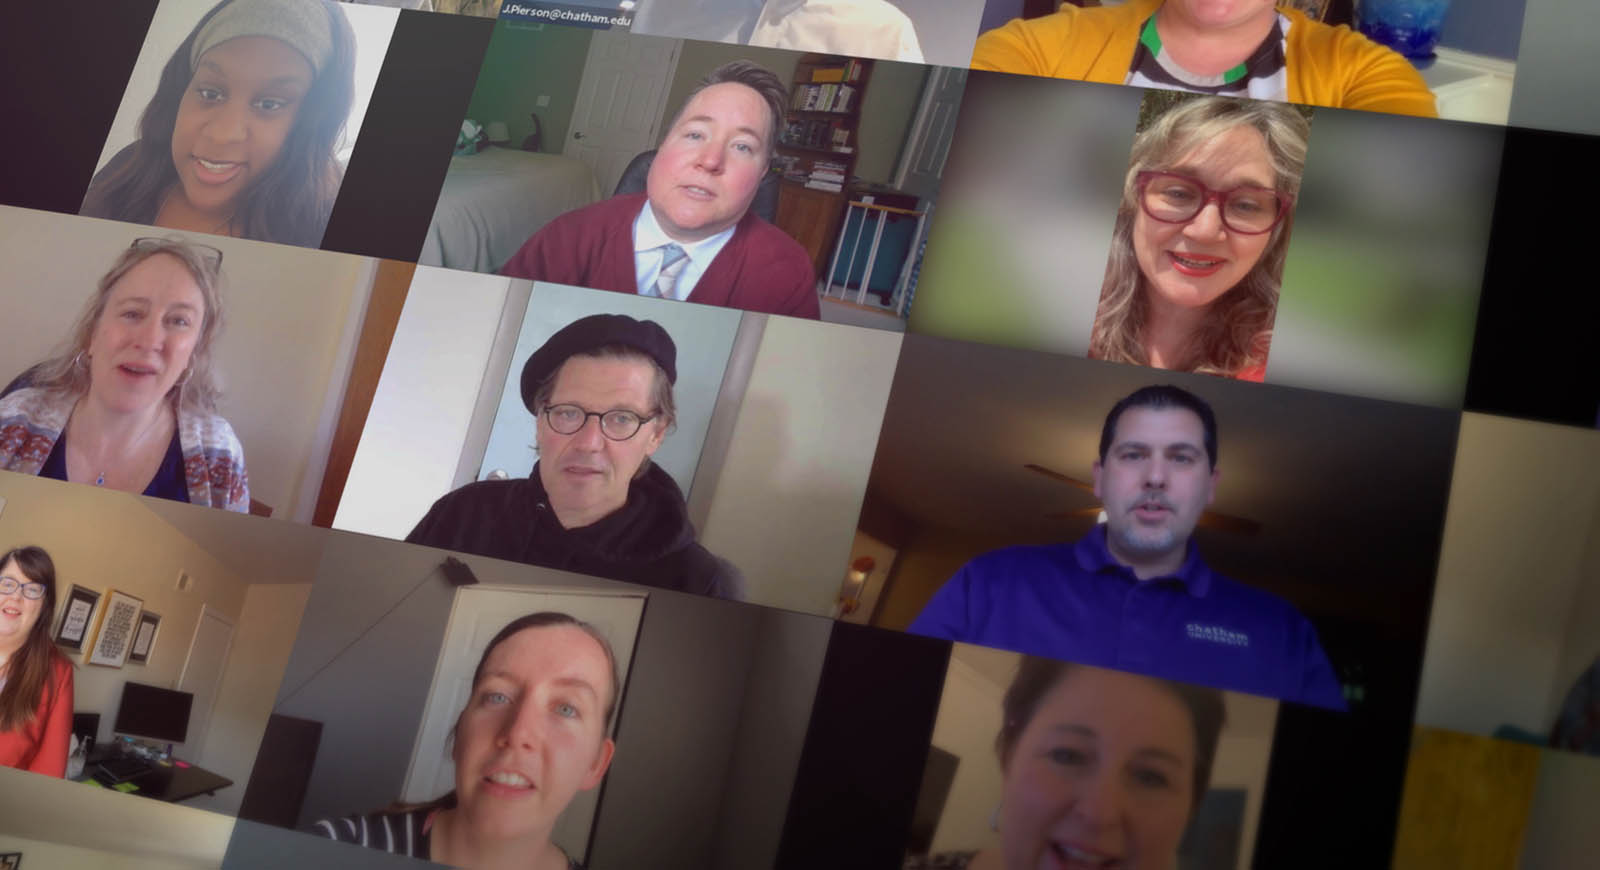 Screenshot from a Zoom call, with grids showing different Chatham University community members